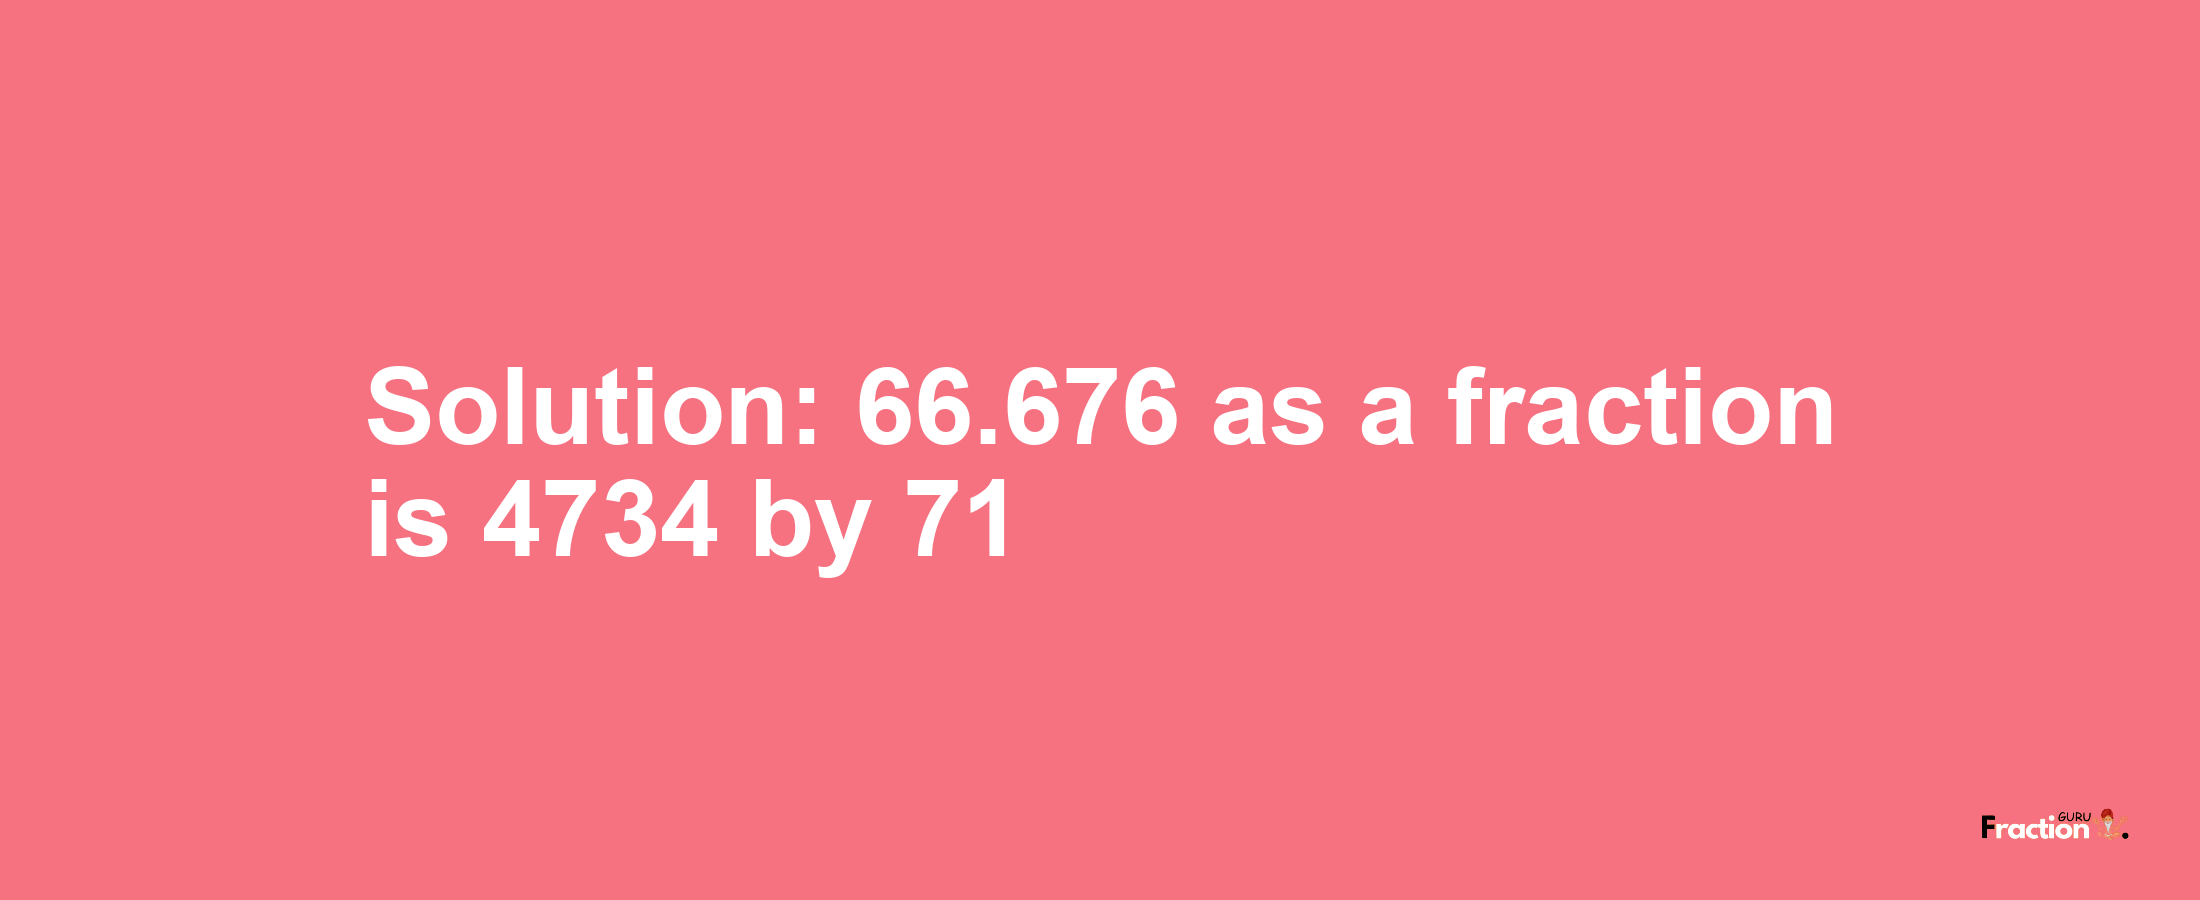 Solution:66.676 as a fraction is 4734/71